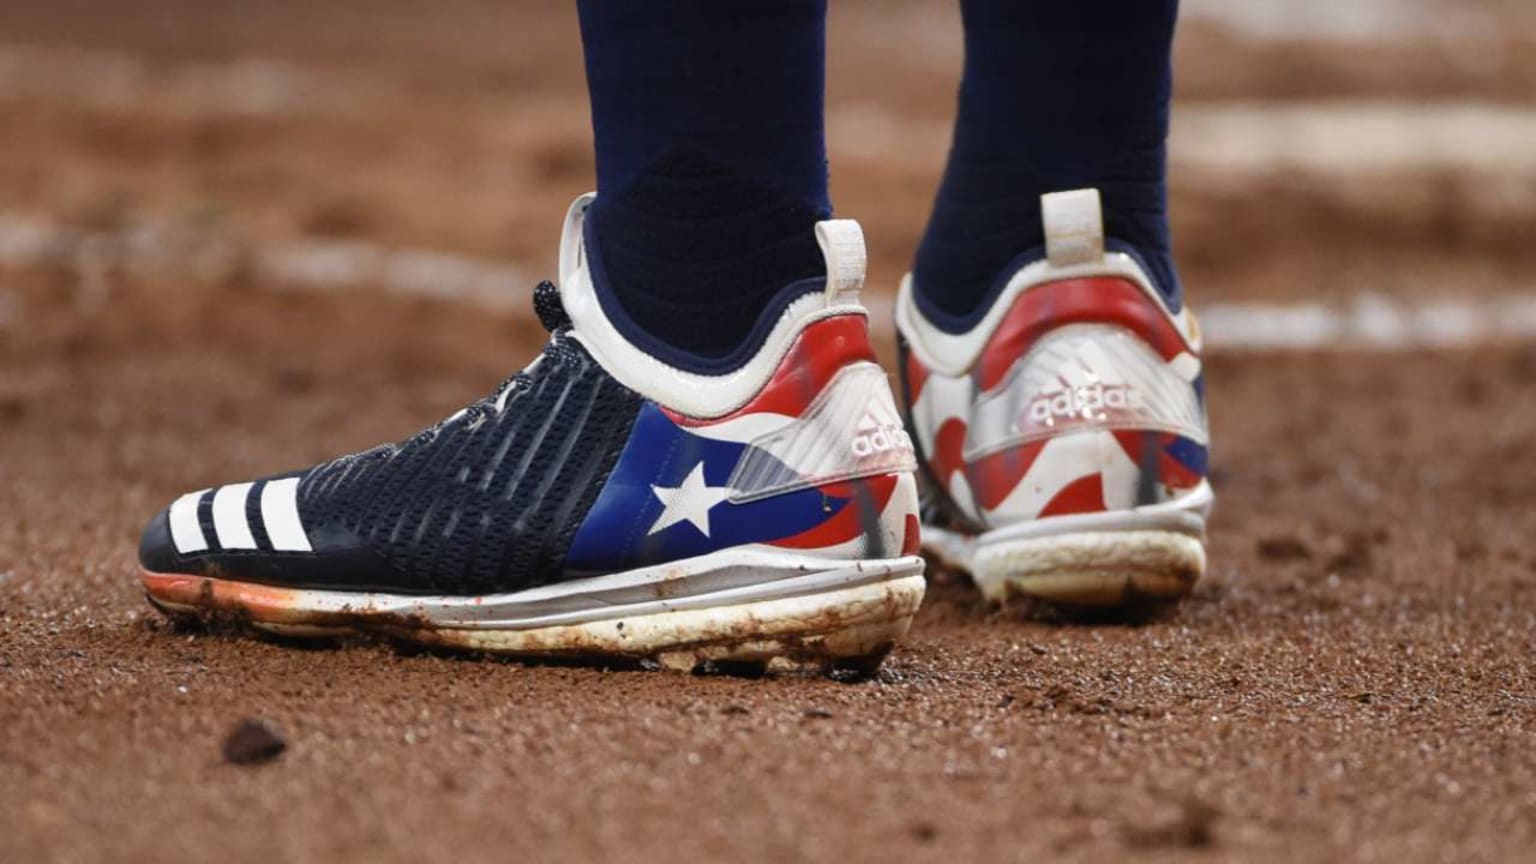 Miguel Cabrera of the Detroit Tigers adidas cleats during the Spring  News Photo - Getty Images